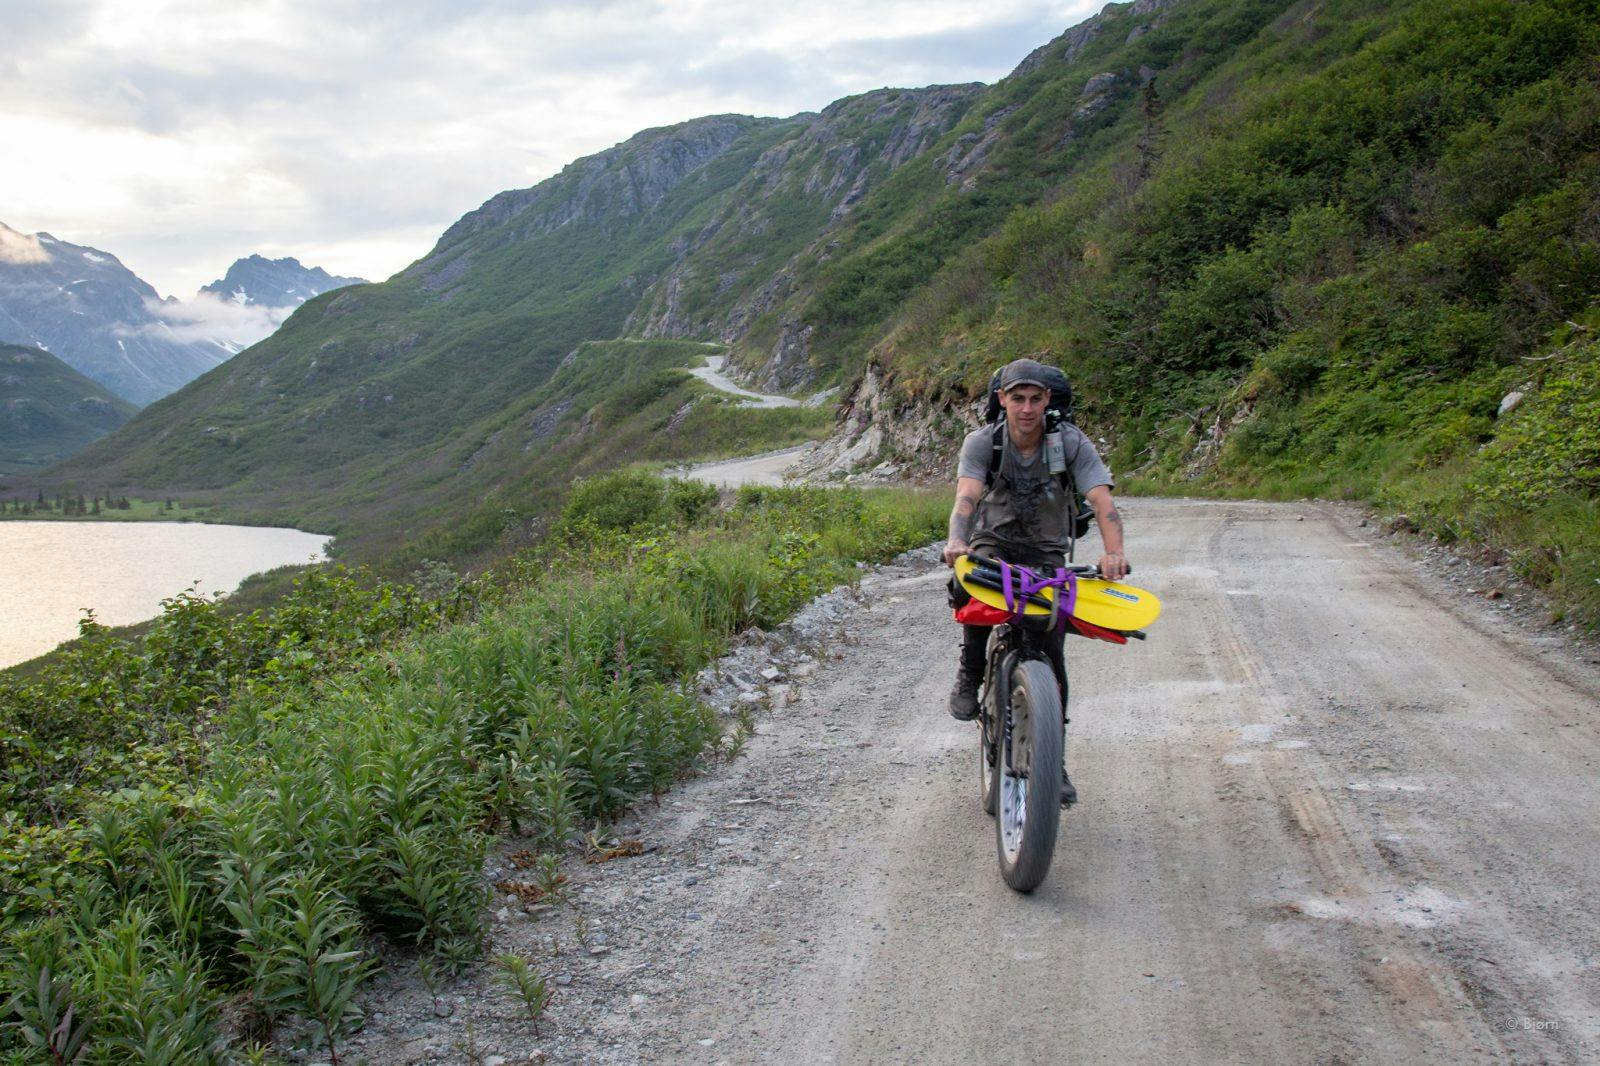 Brent biking the Pile Bay-Williamsport Road from Cook Inlet to Lake Iliamna.